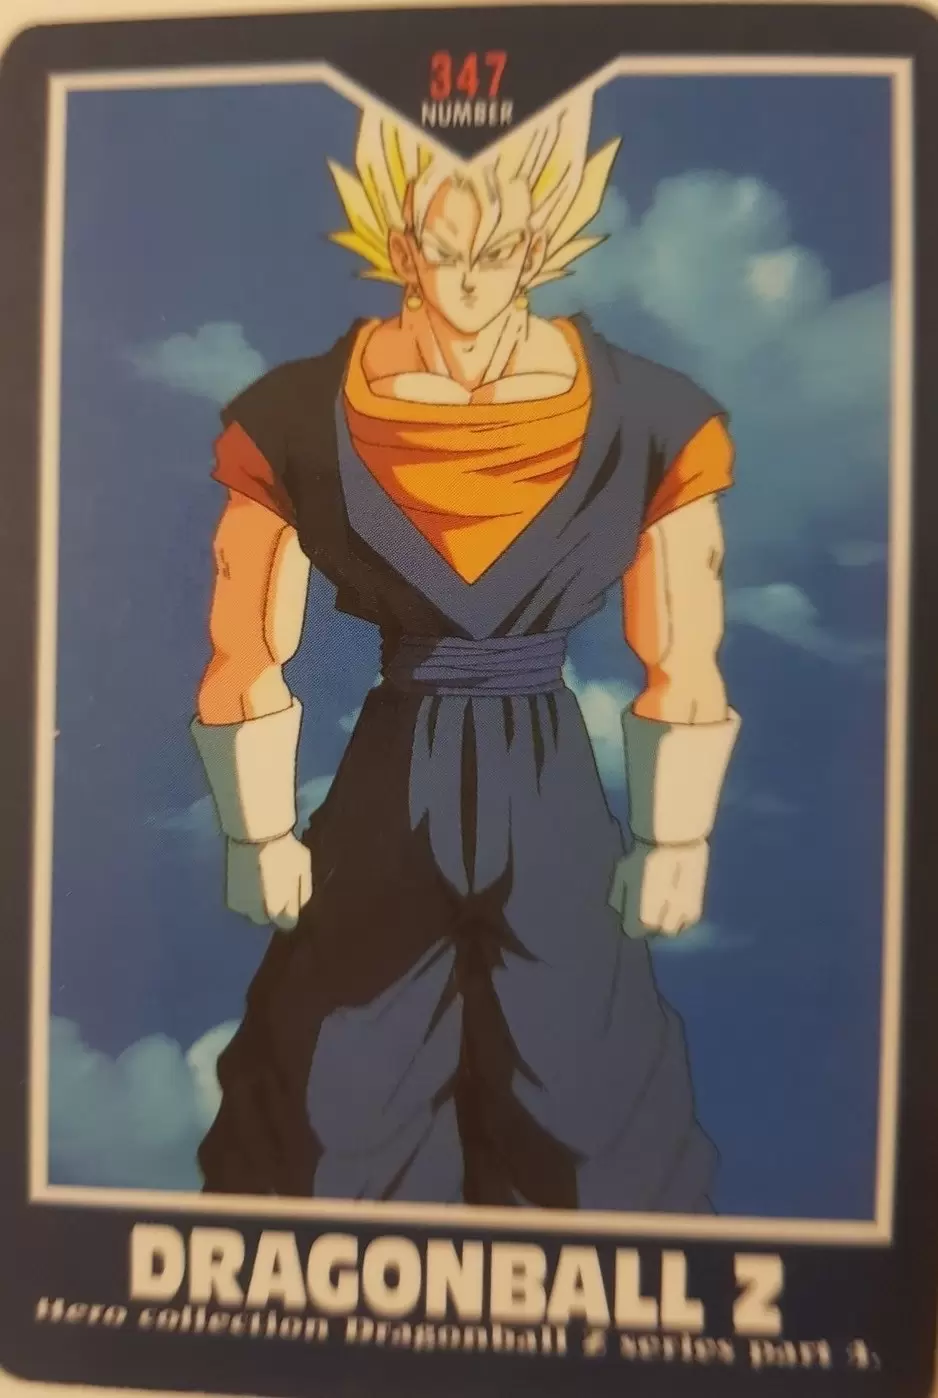 Dragon Ball Z Hero Collection Series Part 4 - Card number 347